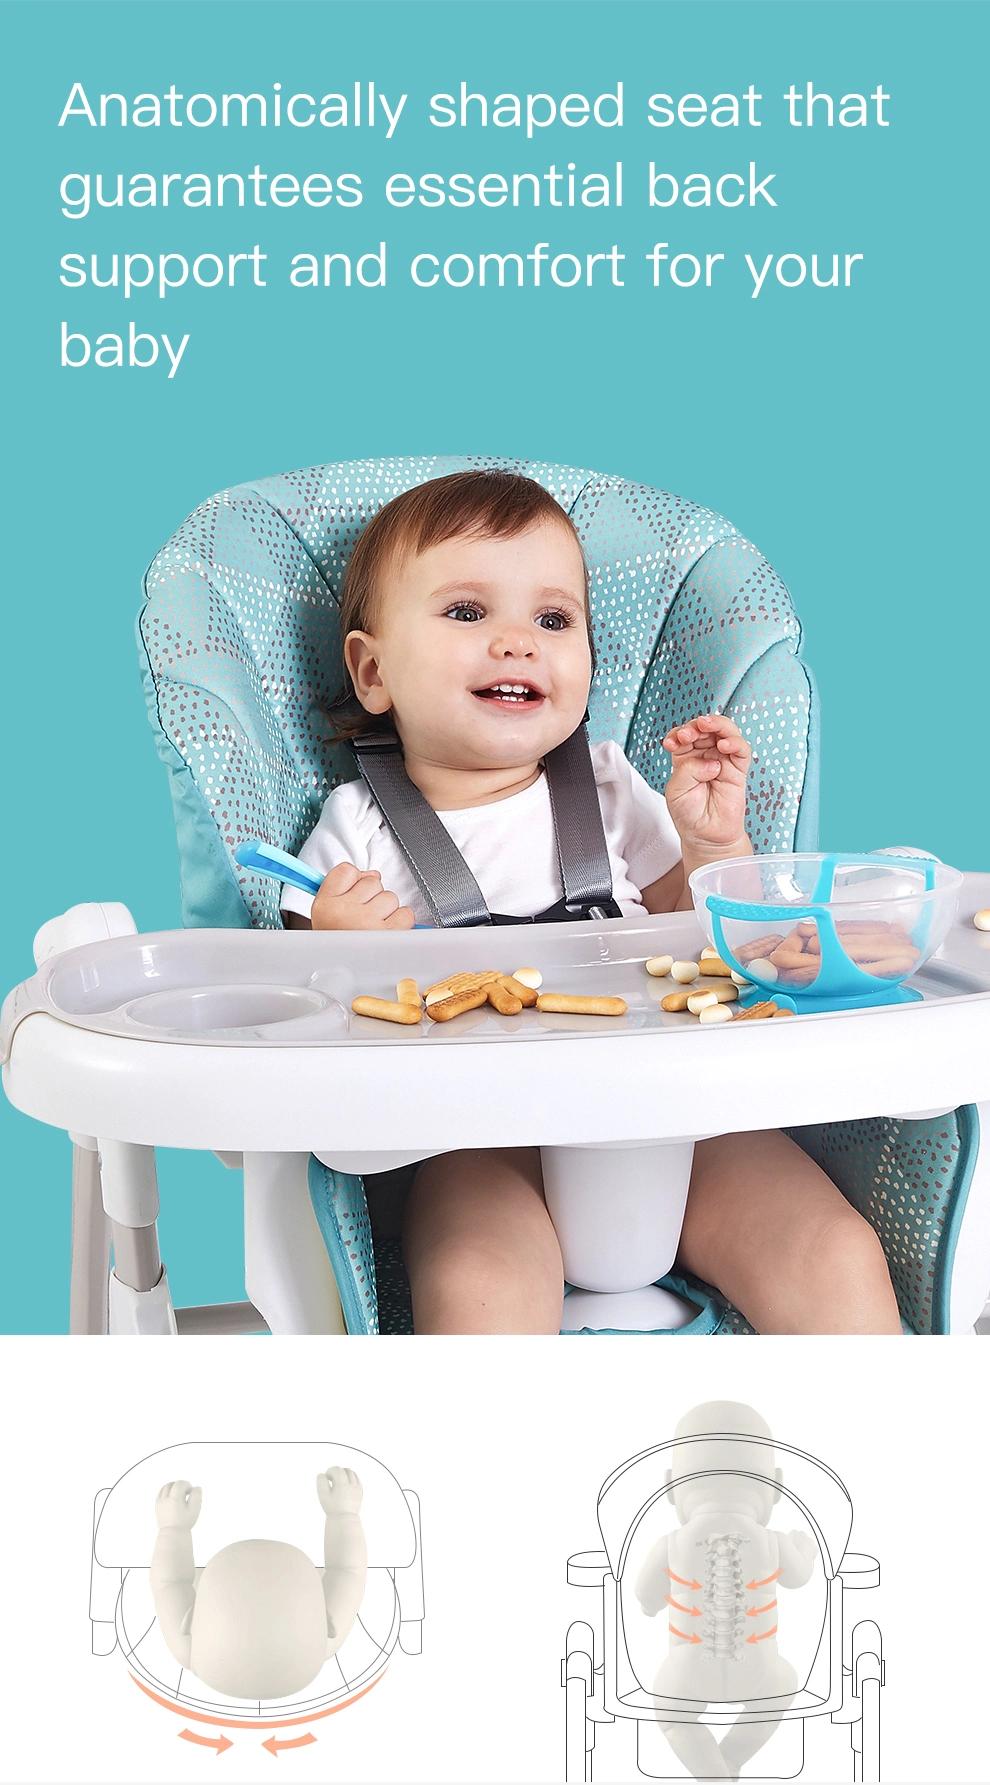 High Quality Multi-Functional Children High Chair Portable Folding Kids Table Dining Chair Baby Eating Chair